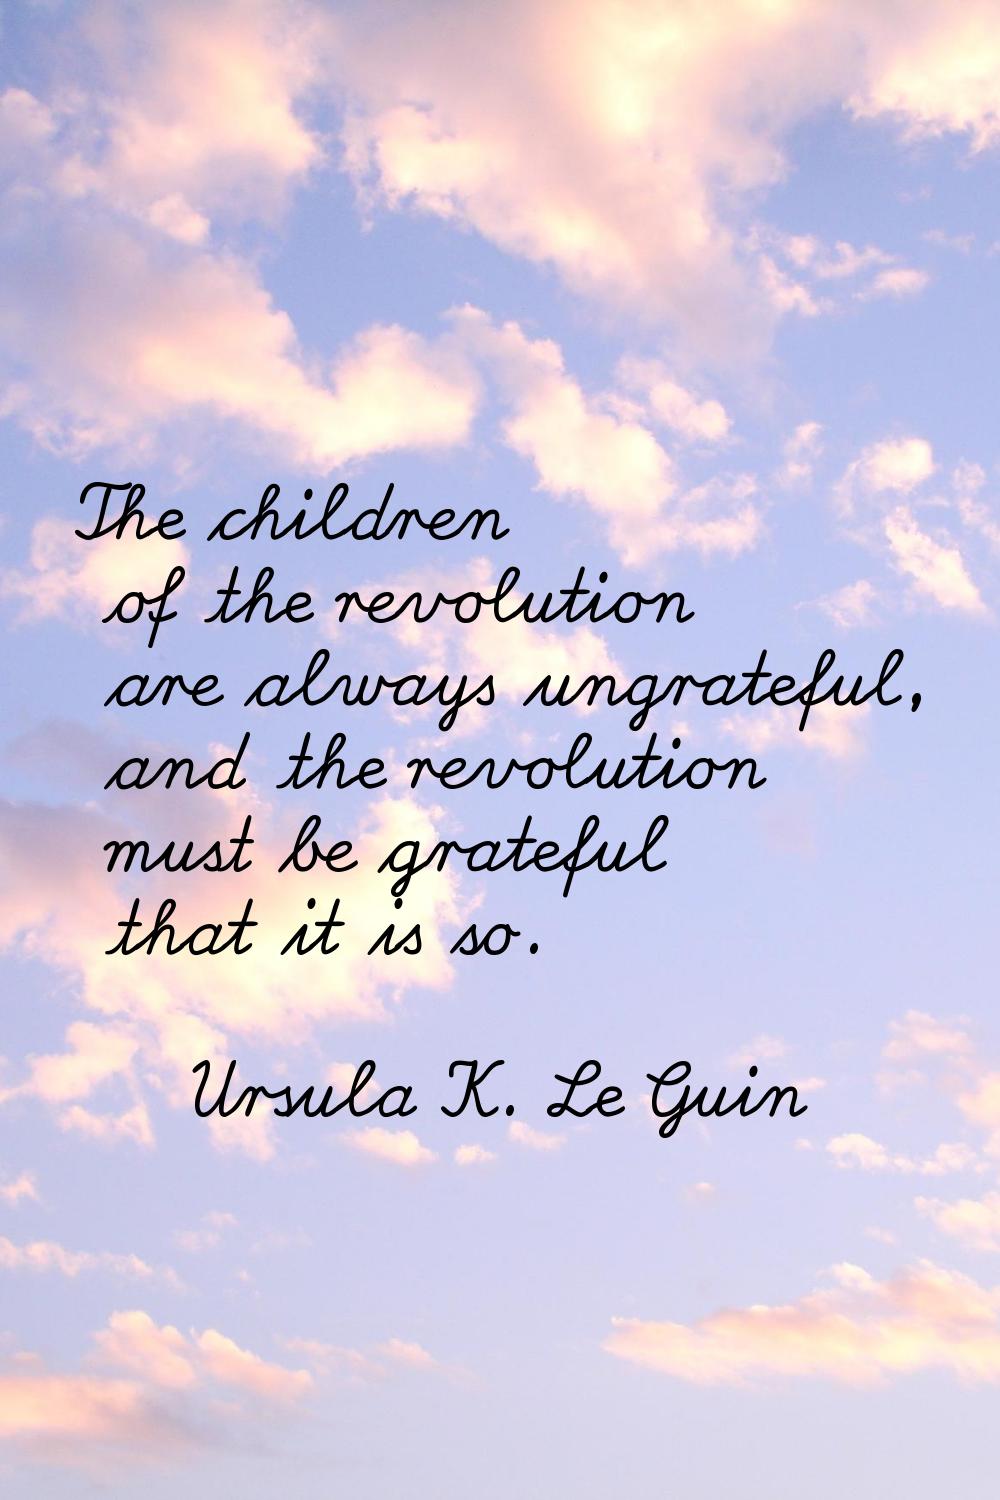 The children of the revolution are always ungrateful, and the revolution must be grateful that it i